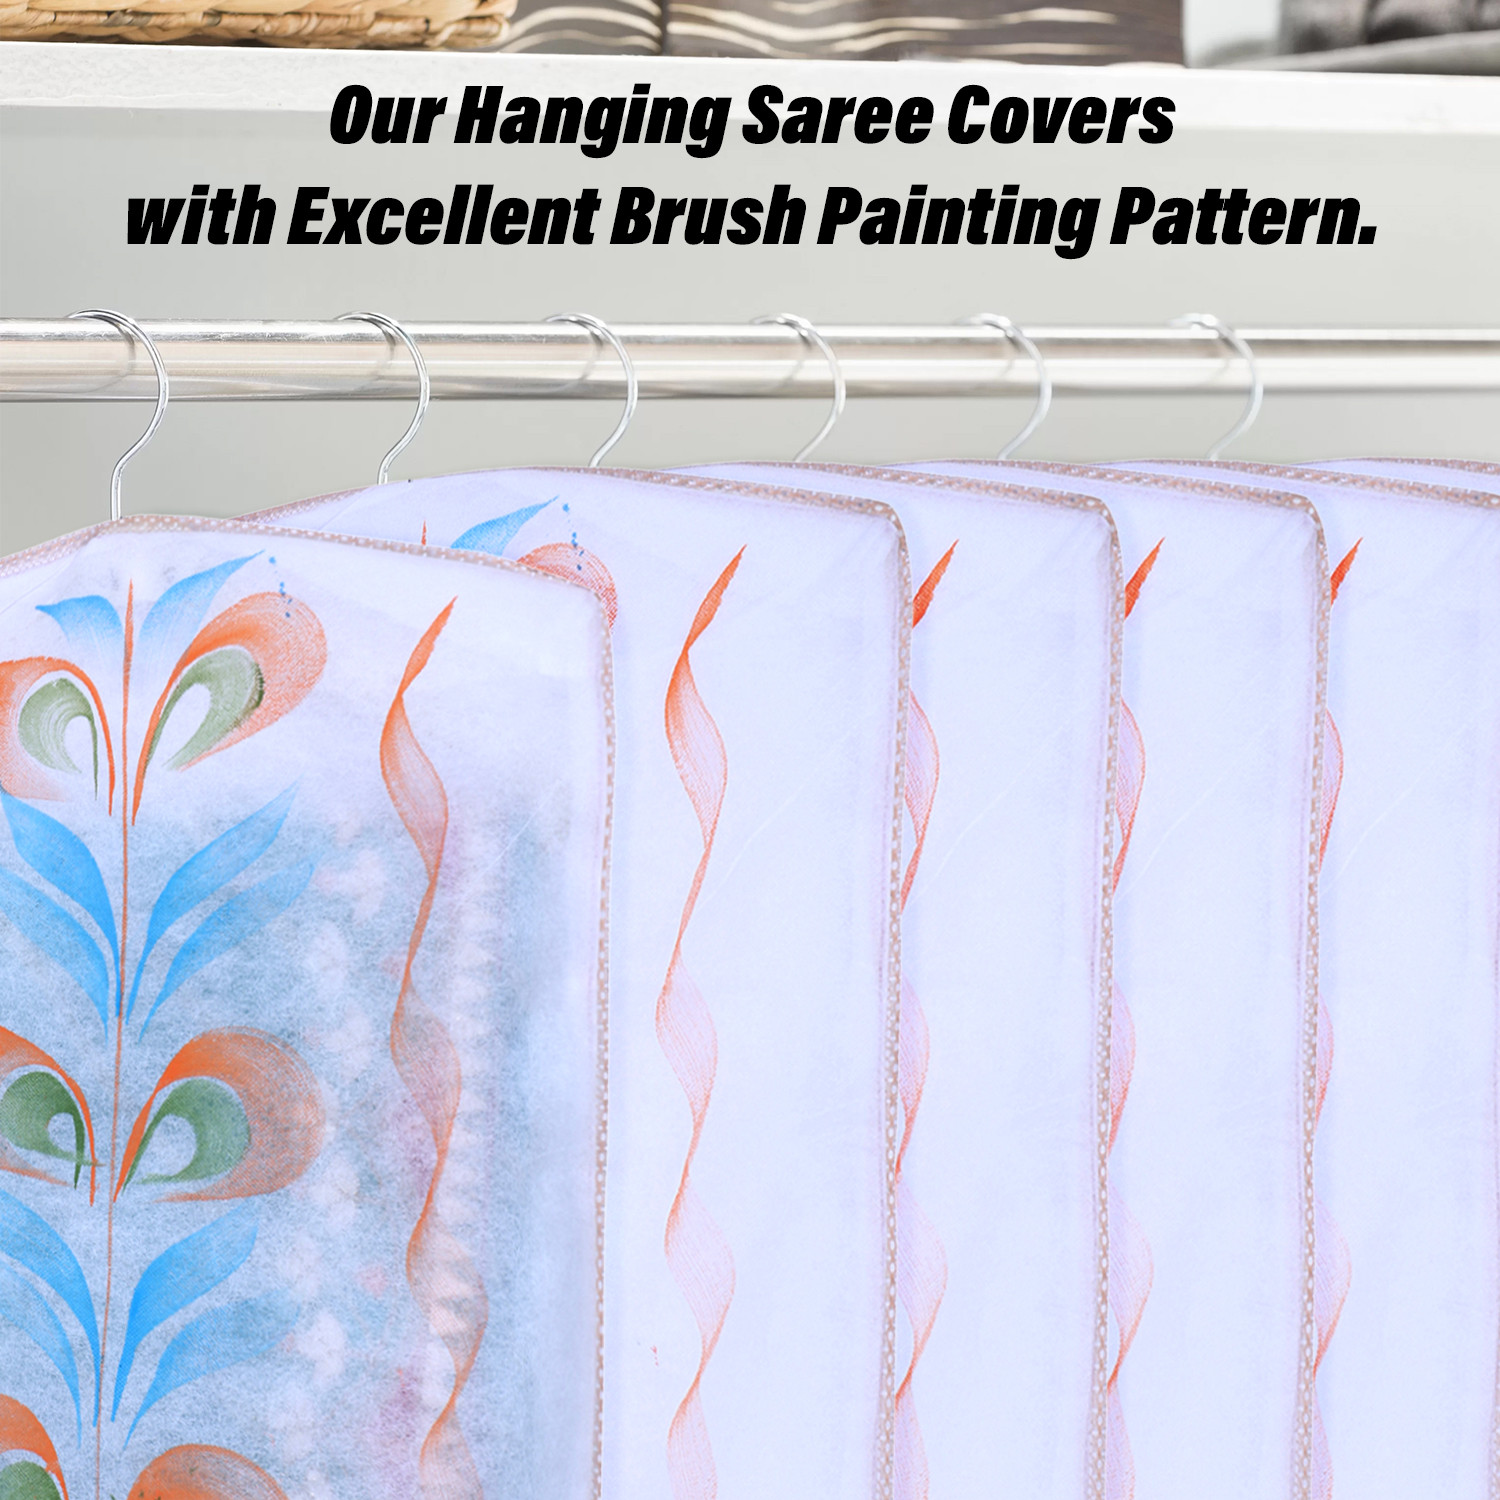 Kuber Industries Hanging Saree Cover | Brush Painting Pattern Saree Cover | Non-Woven Saree Covers for Home | Saree Cover with Small Transparent view |  Peach